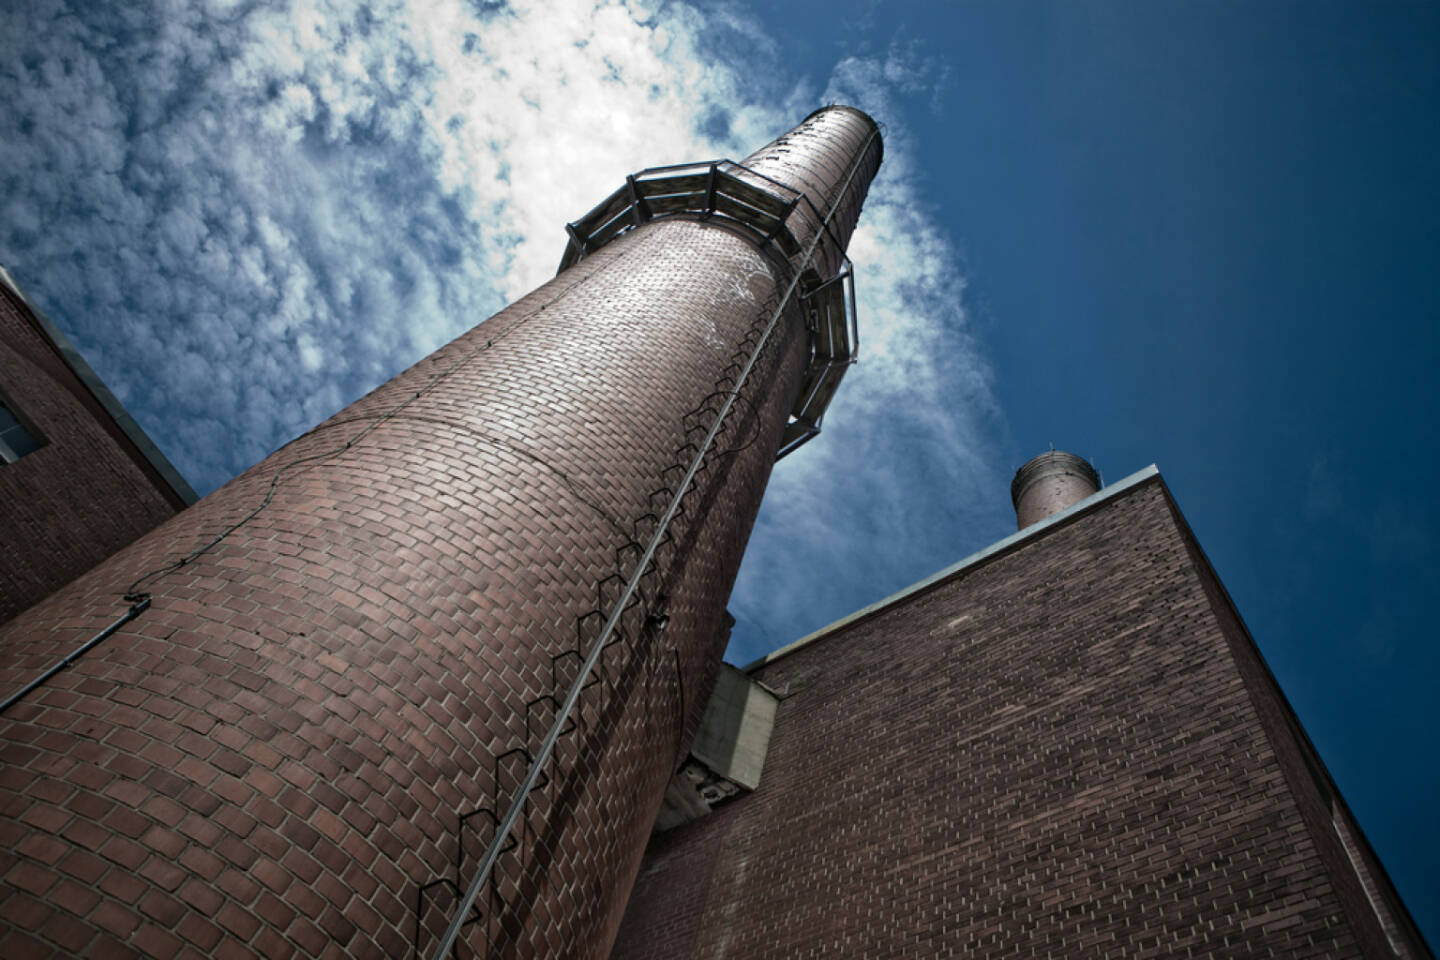 Industrie, Rauchfang, Backstein, Fabrik, Gebäude, http://www.shutterstock.com/de/pic-153115994/stock-photo-very-tall-chimney-with-a-steel-ladder-going-up-there.html 